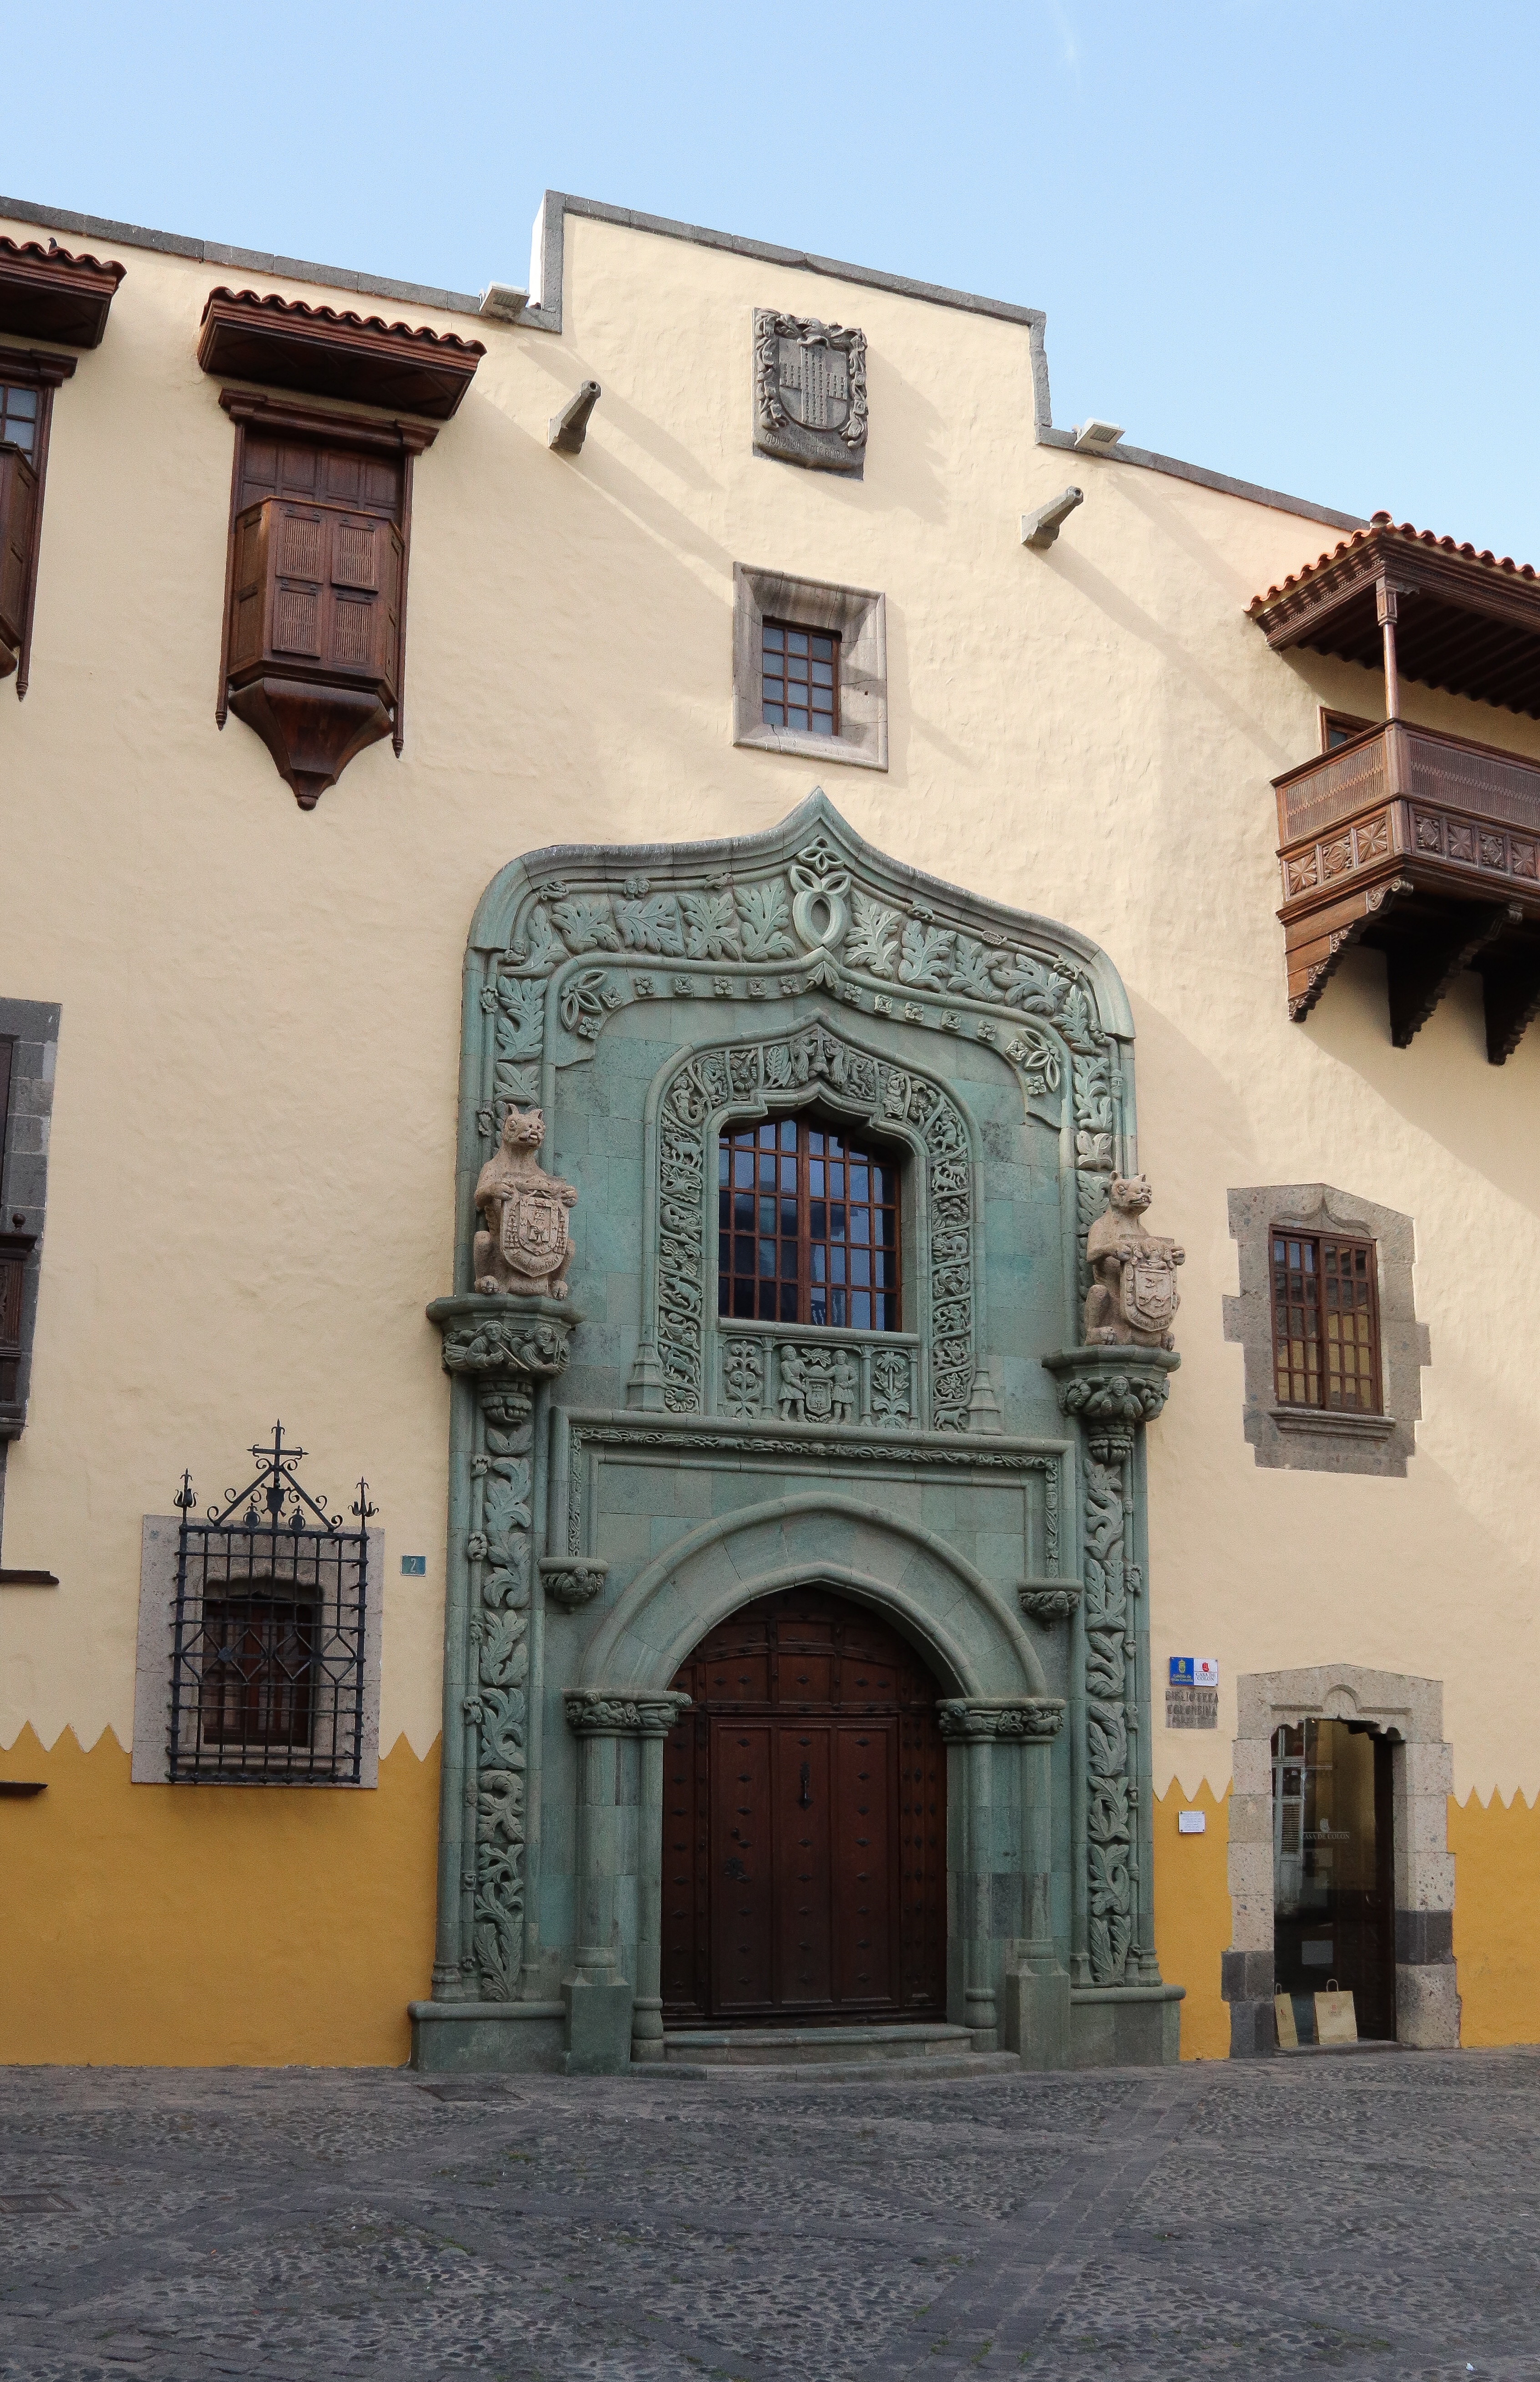 An elaborate doorway at the Casa Colon.  it's claimed that Christopher Columbus stayed here on his journey to the new world. The building now hosts a museum which exhibits some of his personal belongings.